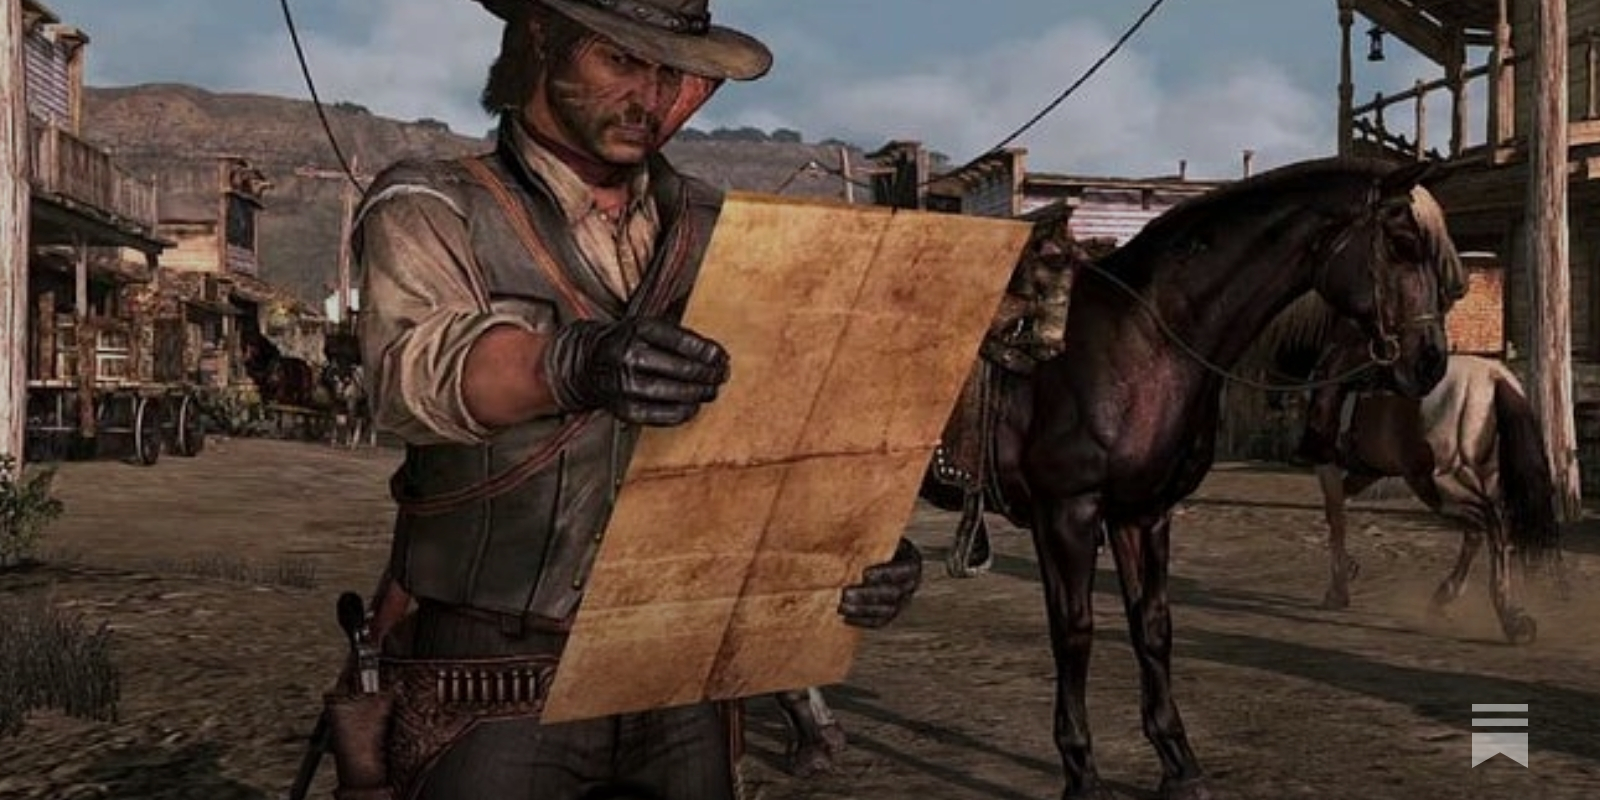 This free update makes Red Dead remaster on PS5 worth the money